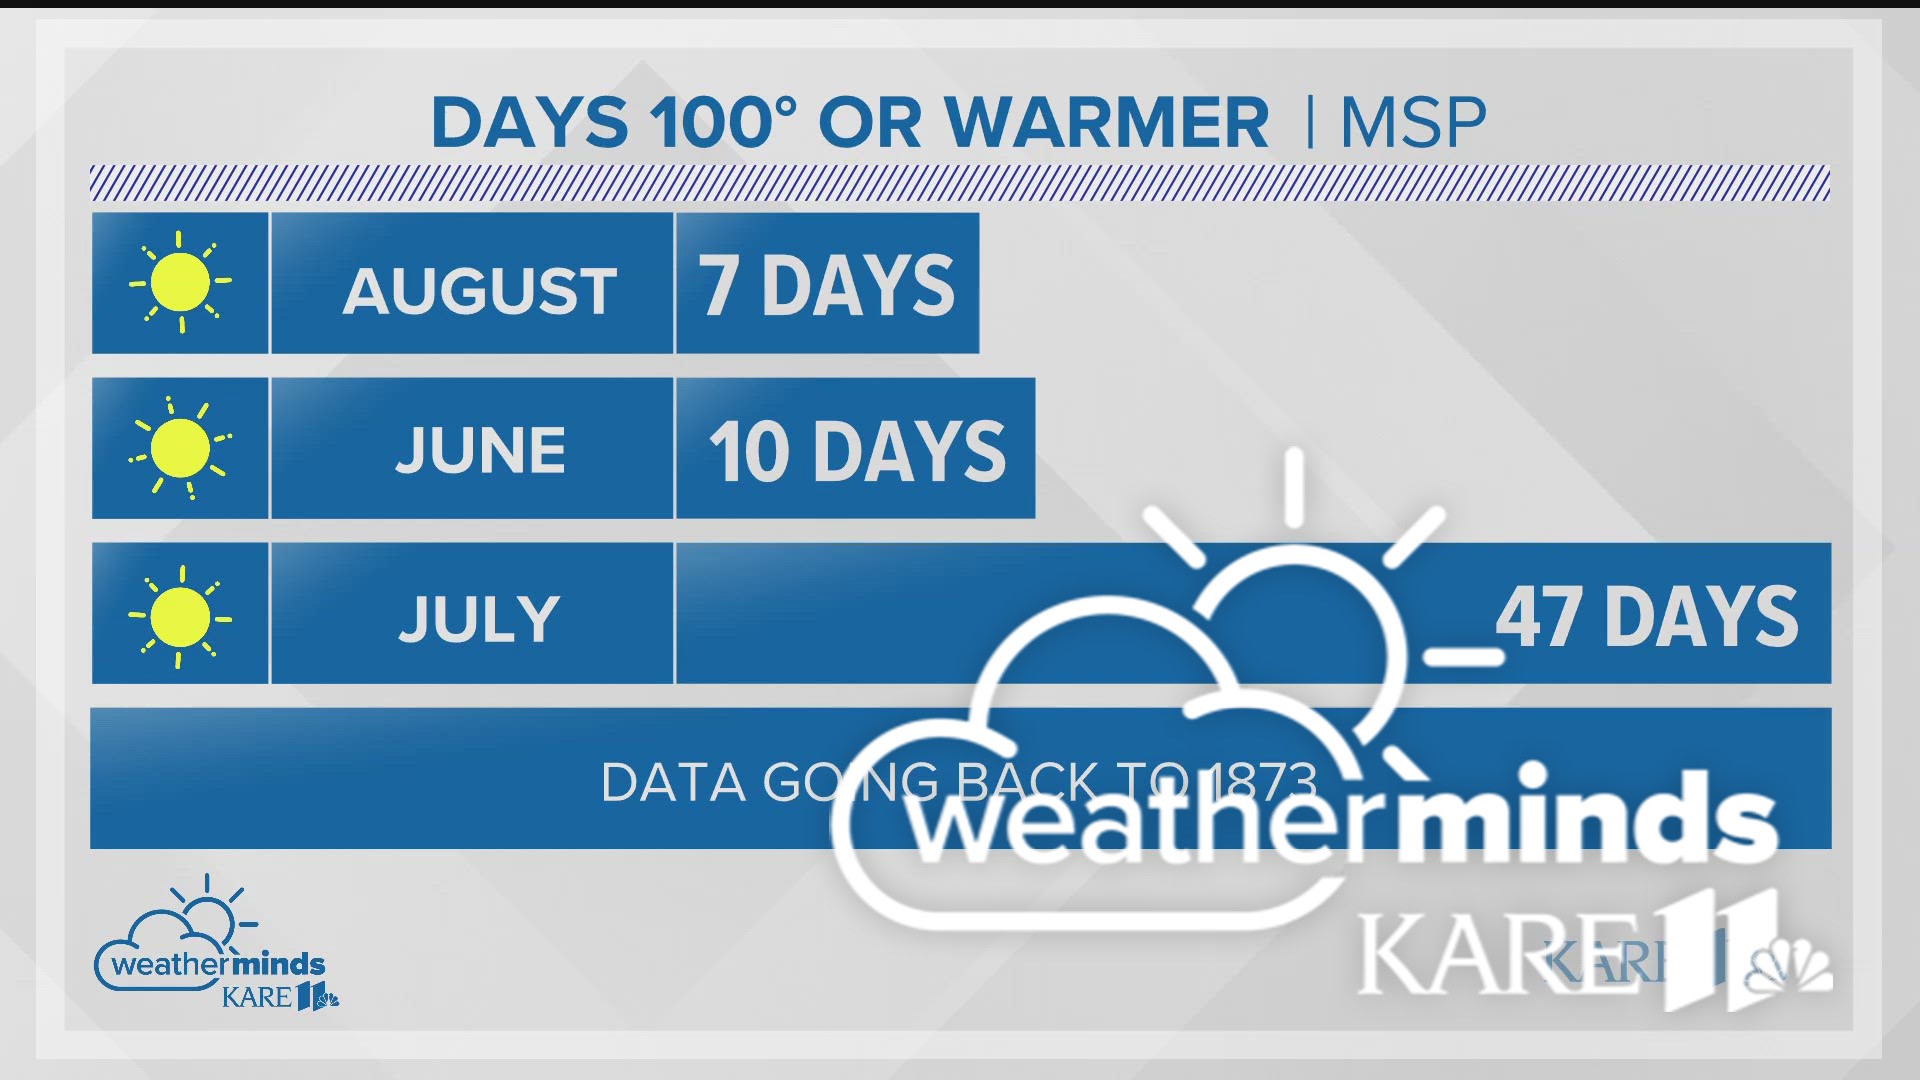 With a chance for triple-digit temperatures on the way, KARE 11 meteorologist Ben Dery explains why it's actually been rare for temperatures to reach 100 in August.